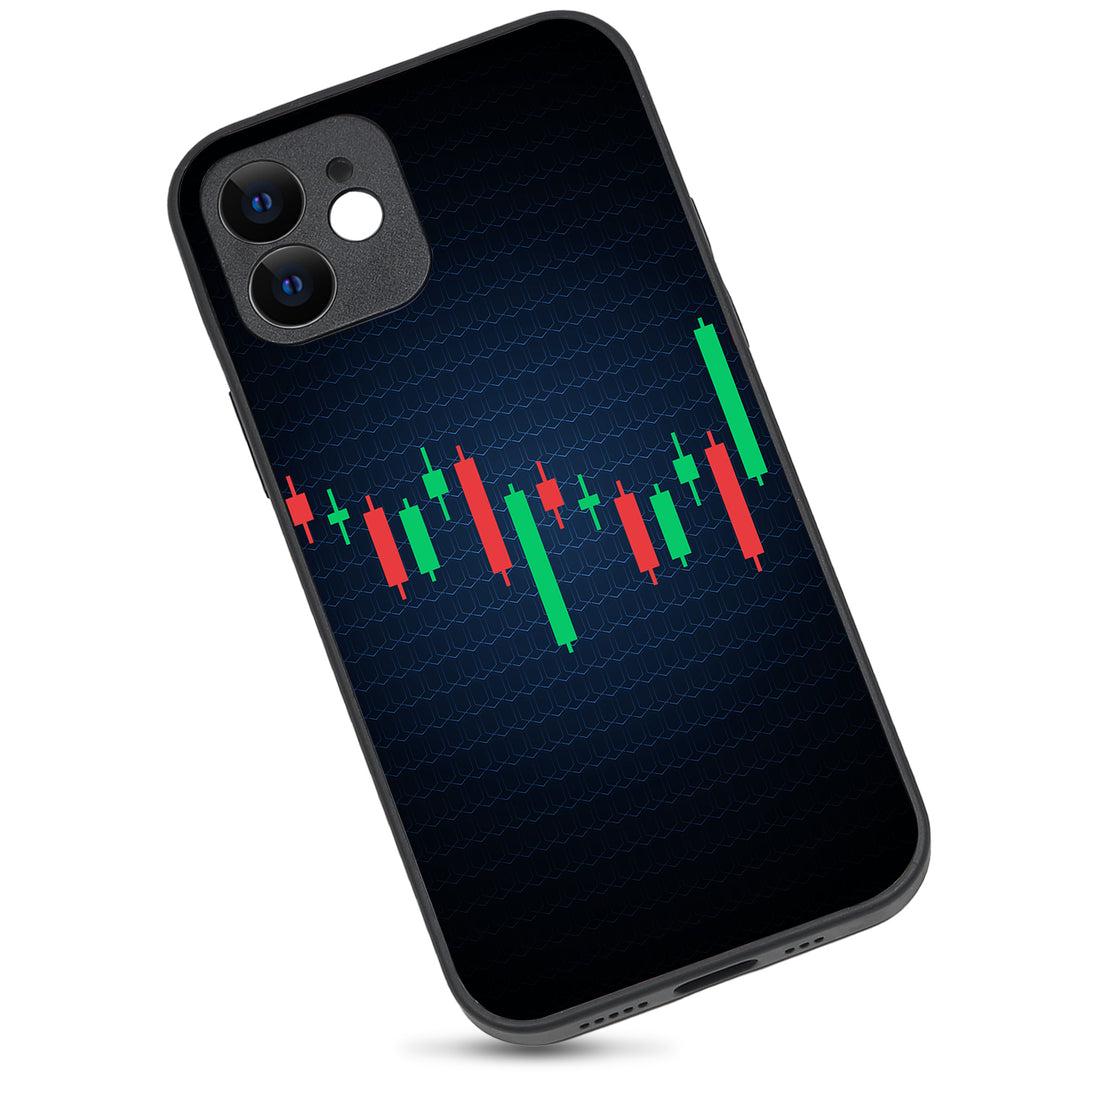 Candlestick Trading iPhone 12 Case